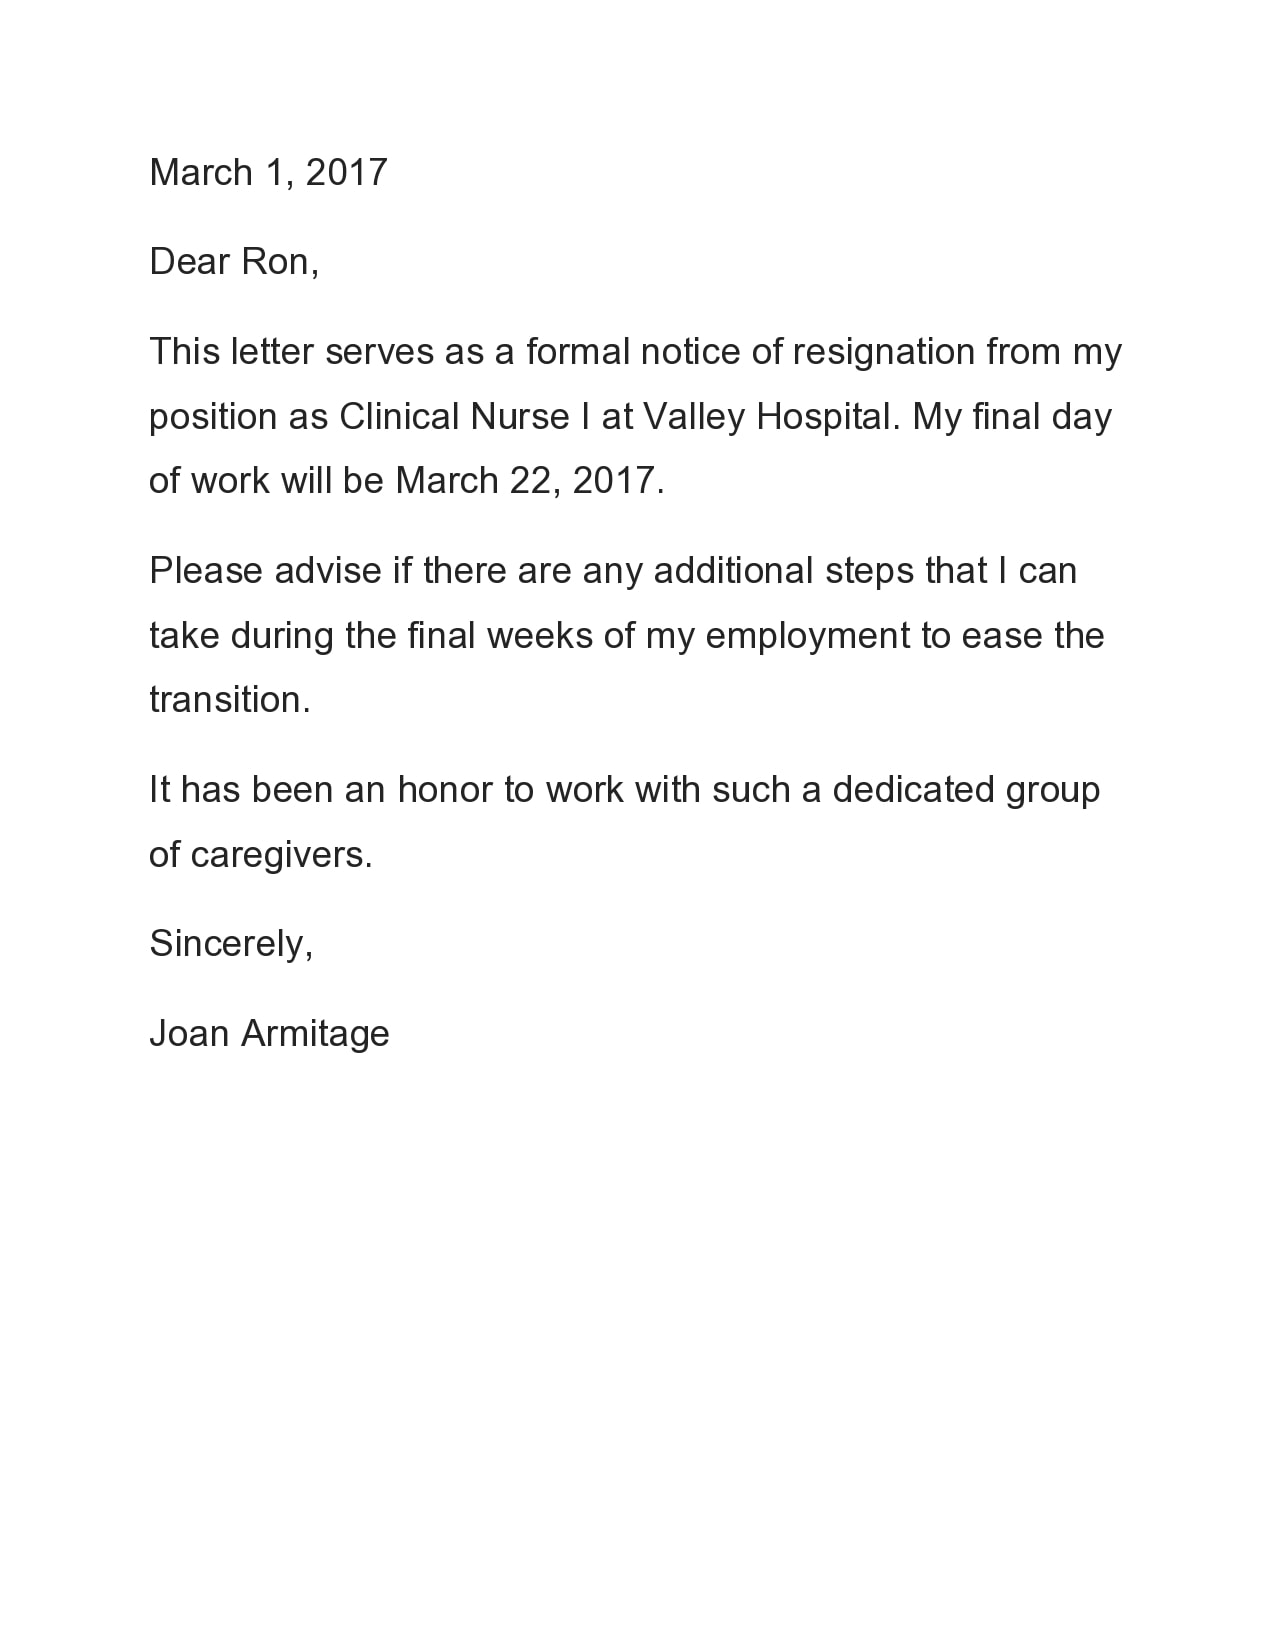 awe-inspiring-examples-of-tips-about-resignation-letter-for-hospital